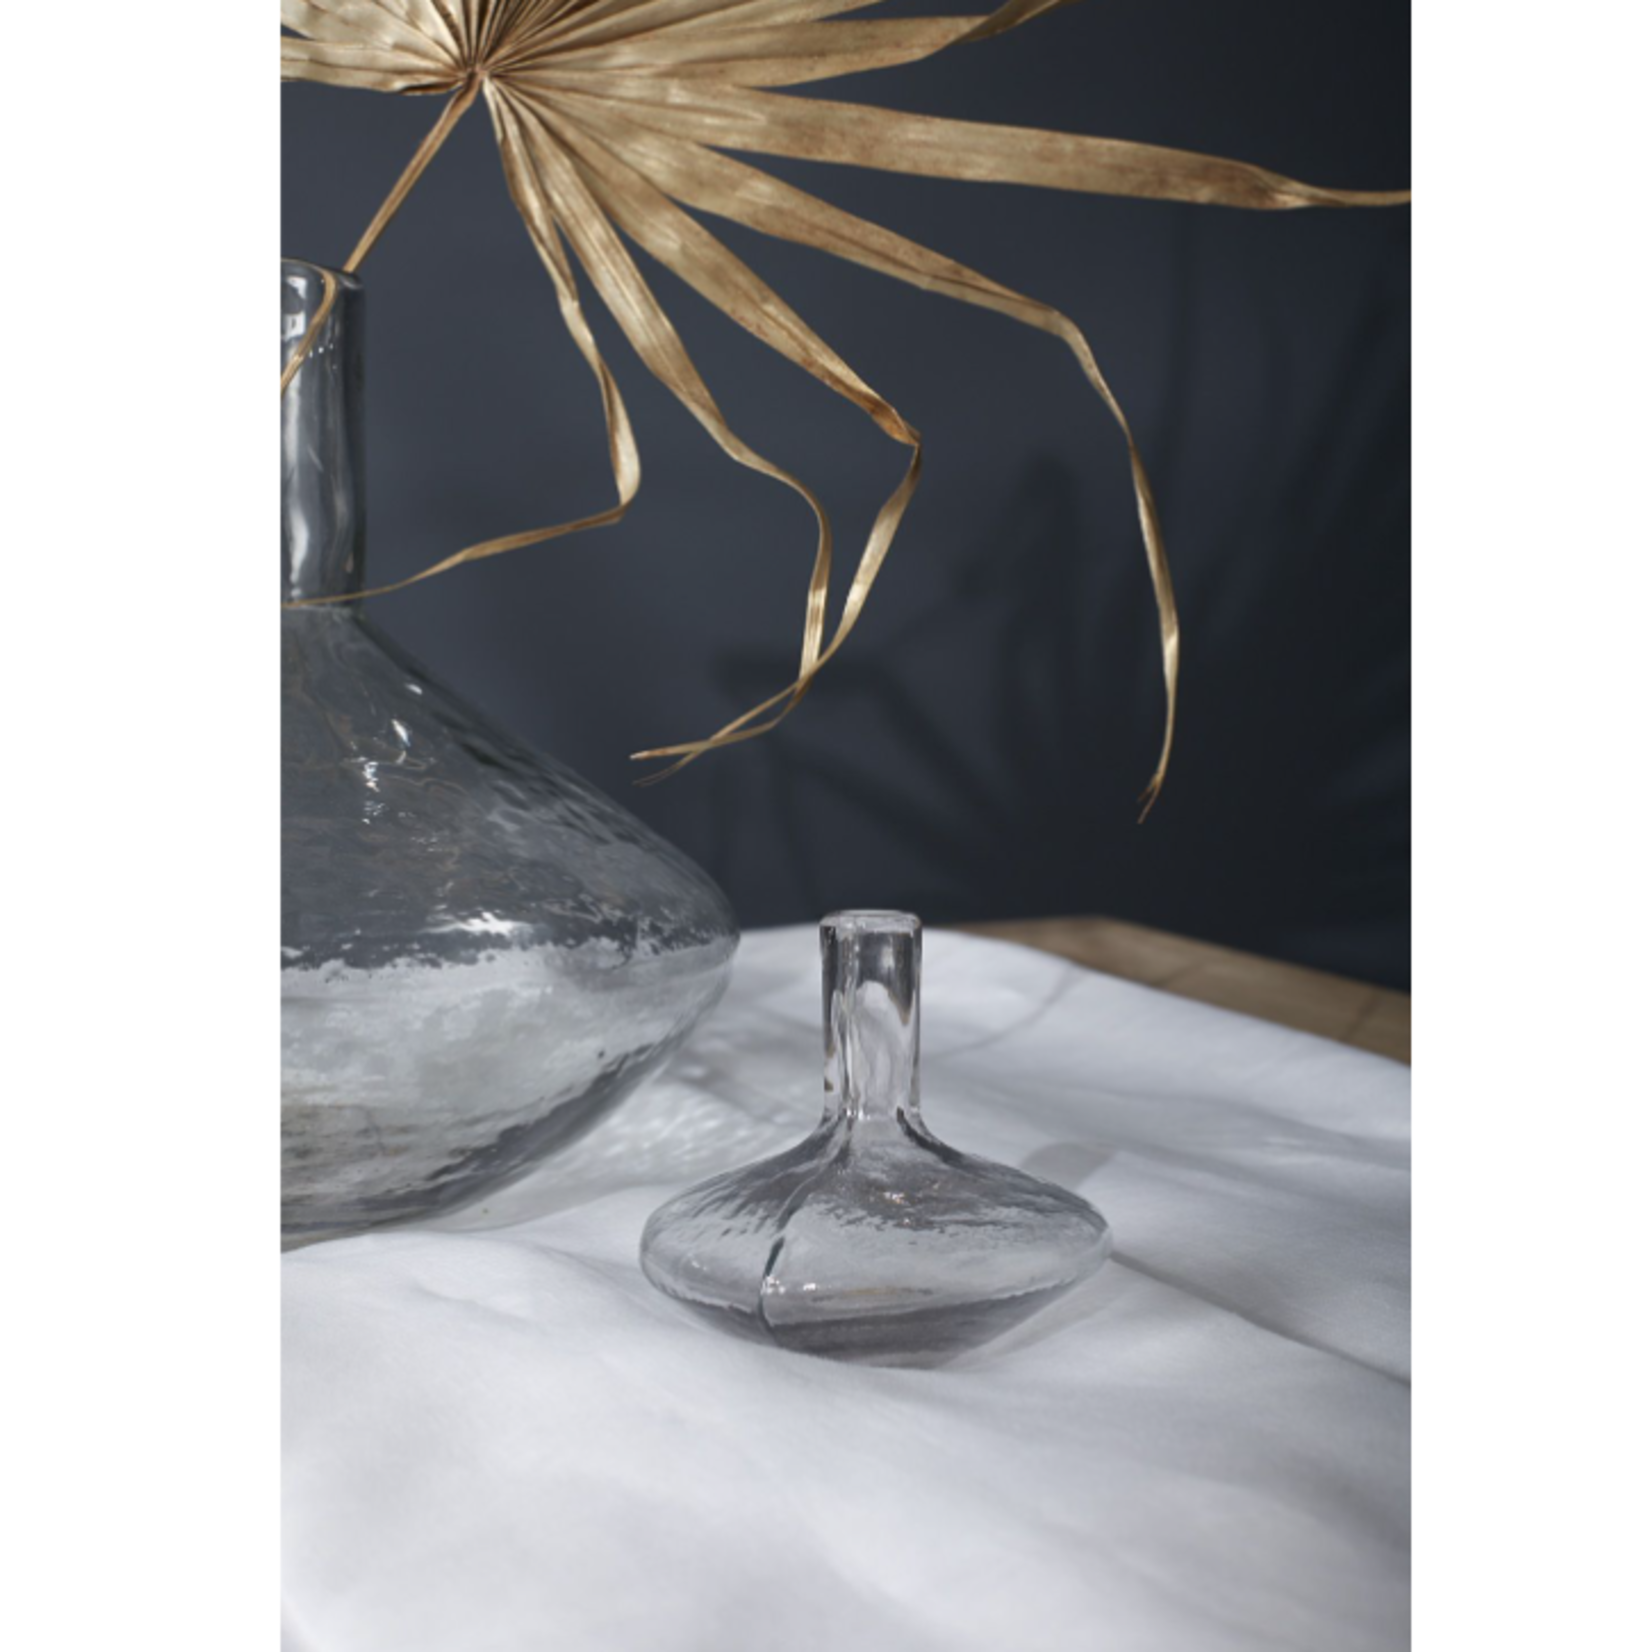 50% off was $17.49 now $8.75. 4.5”h x 5” GLASS SINCERE BUDVASE